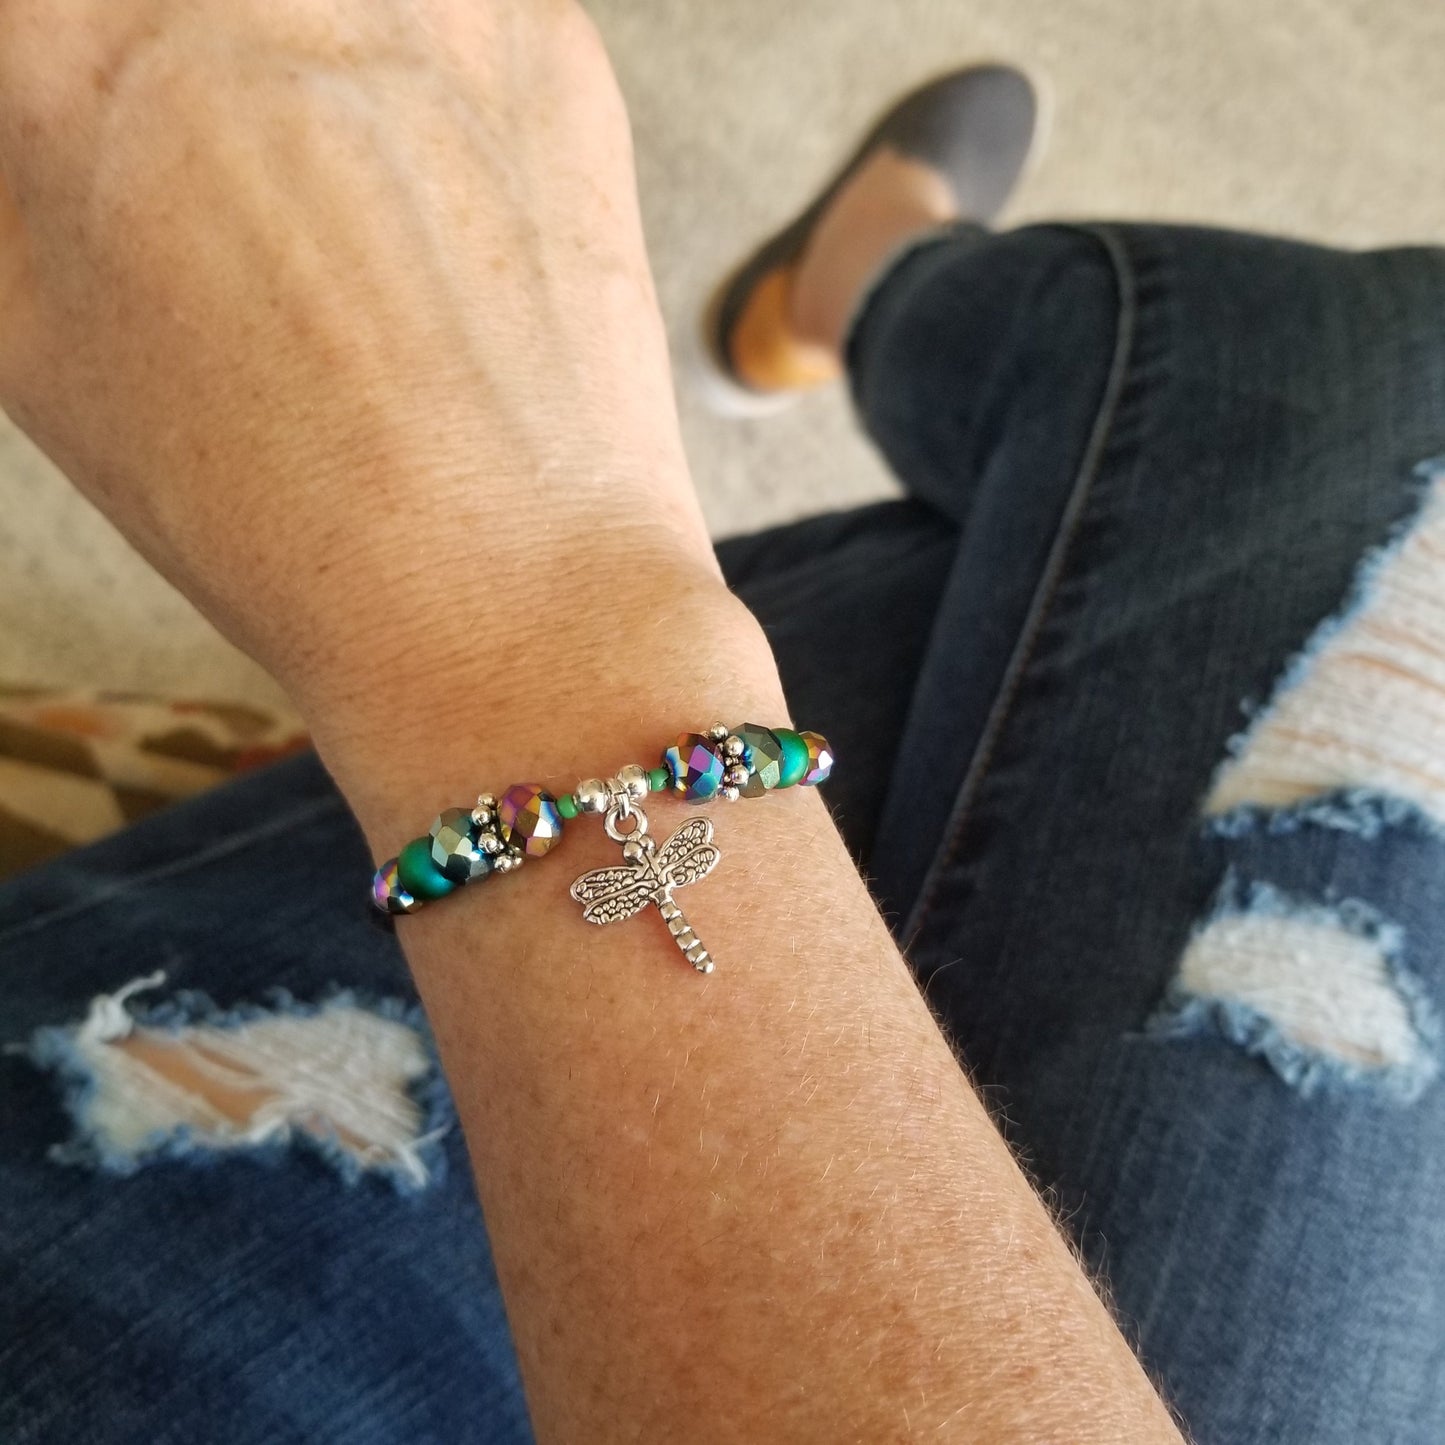 dragonfly charm and iridescent glass beads wrap bracelet on wrist